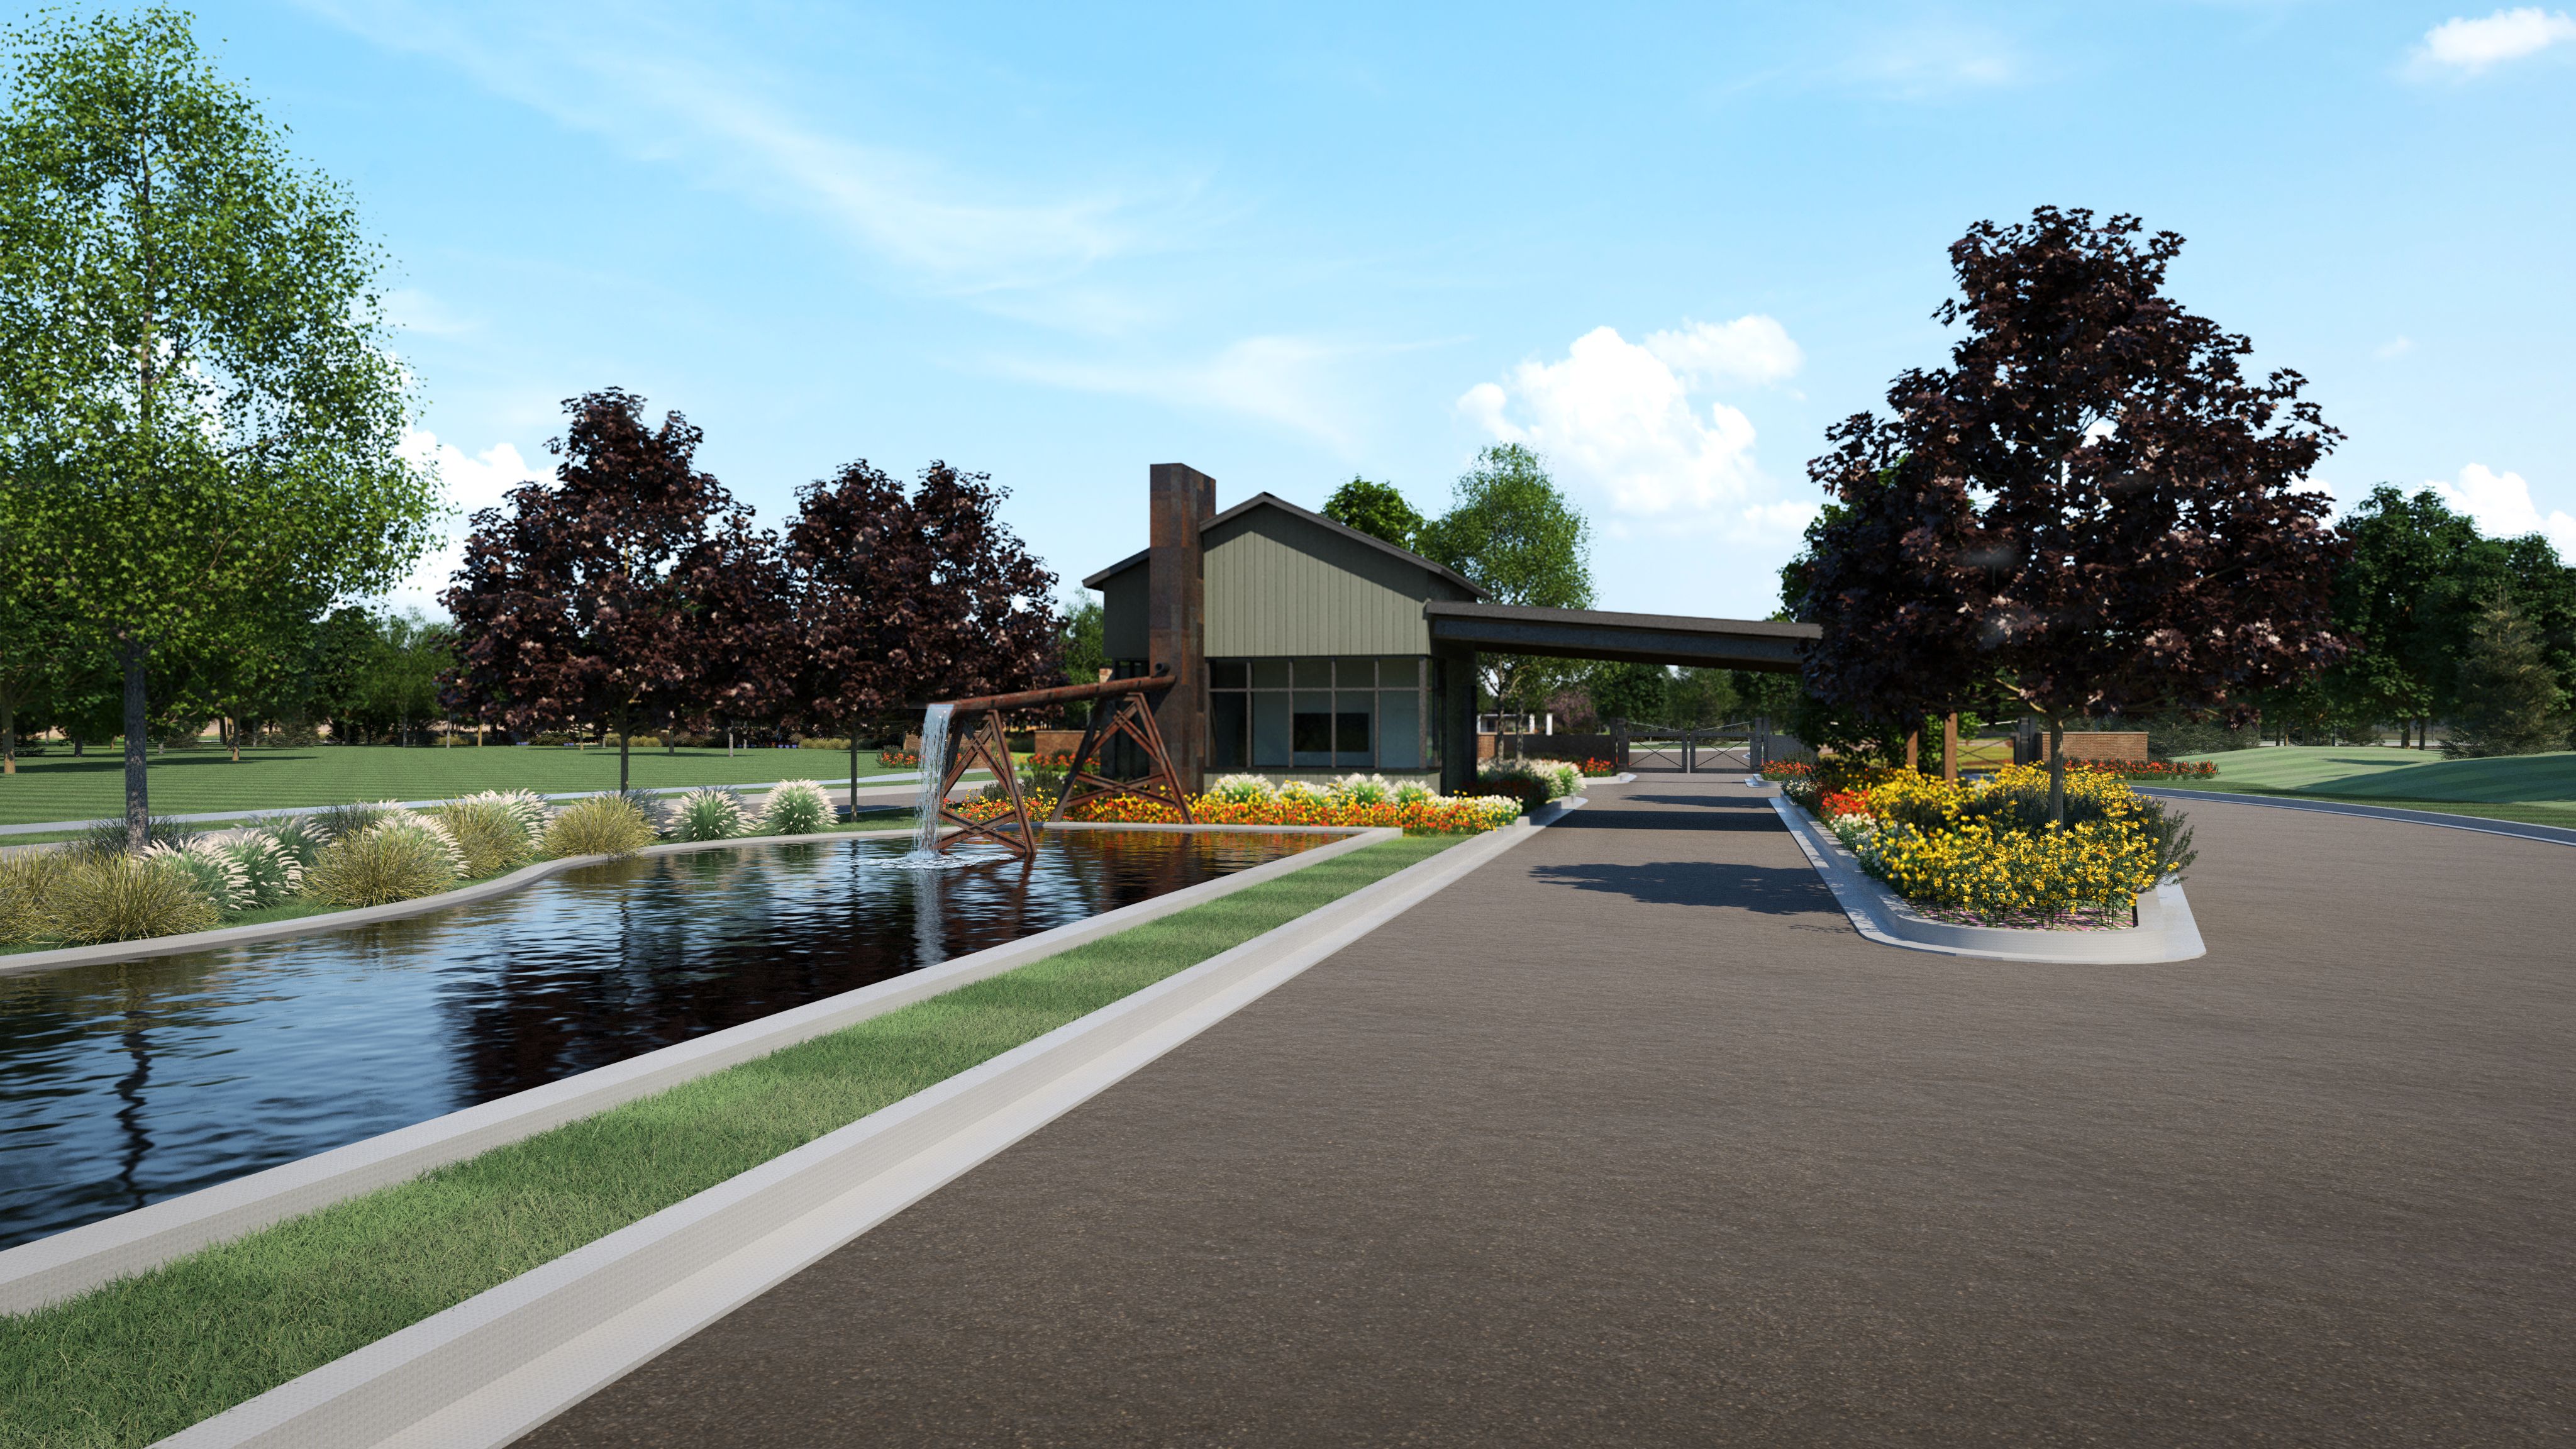 Trilogy Valor Treasure Valley Club Rendering Welcome Center